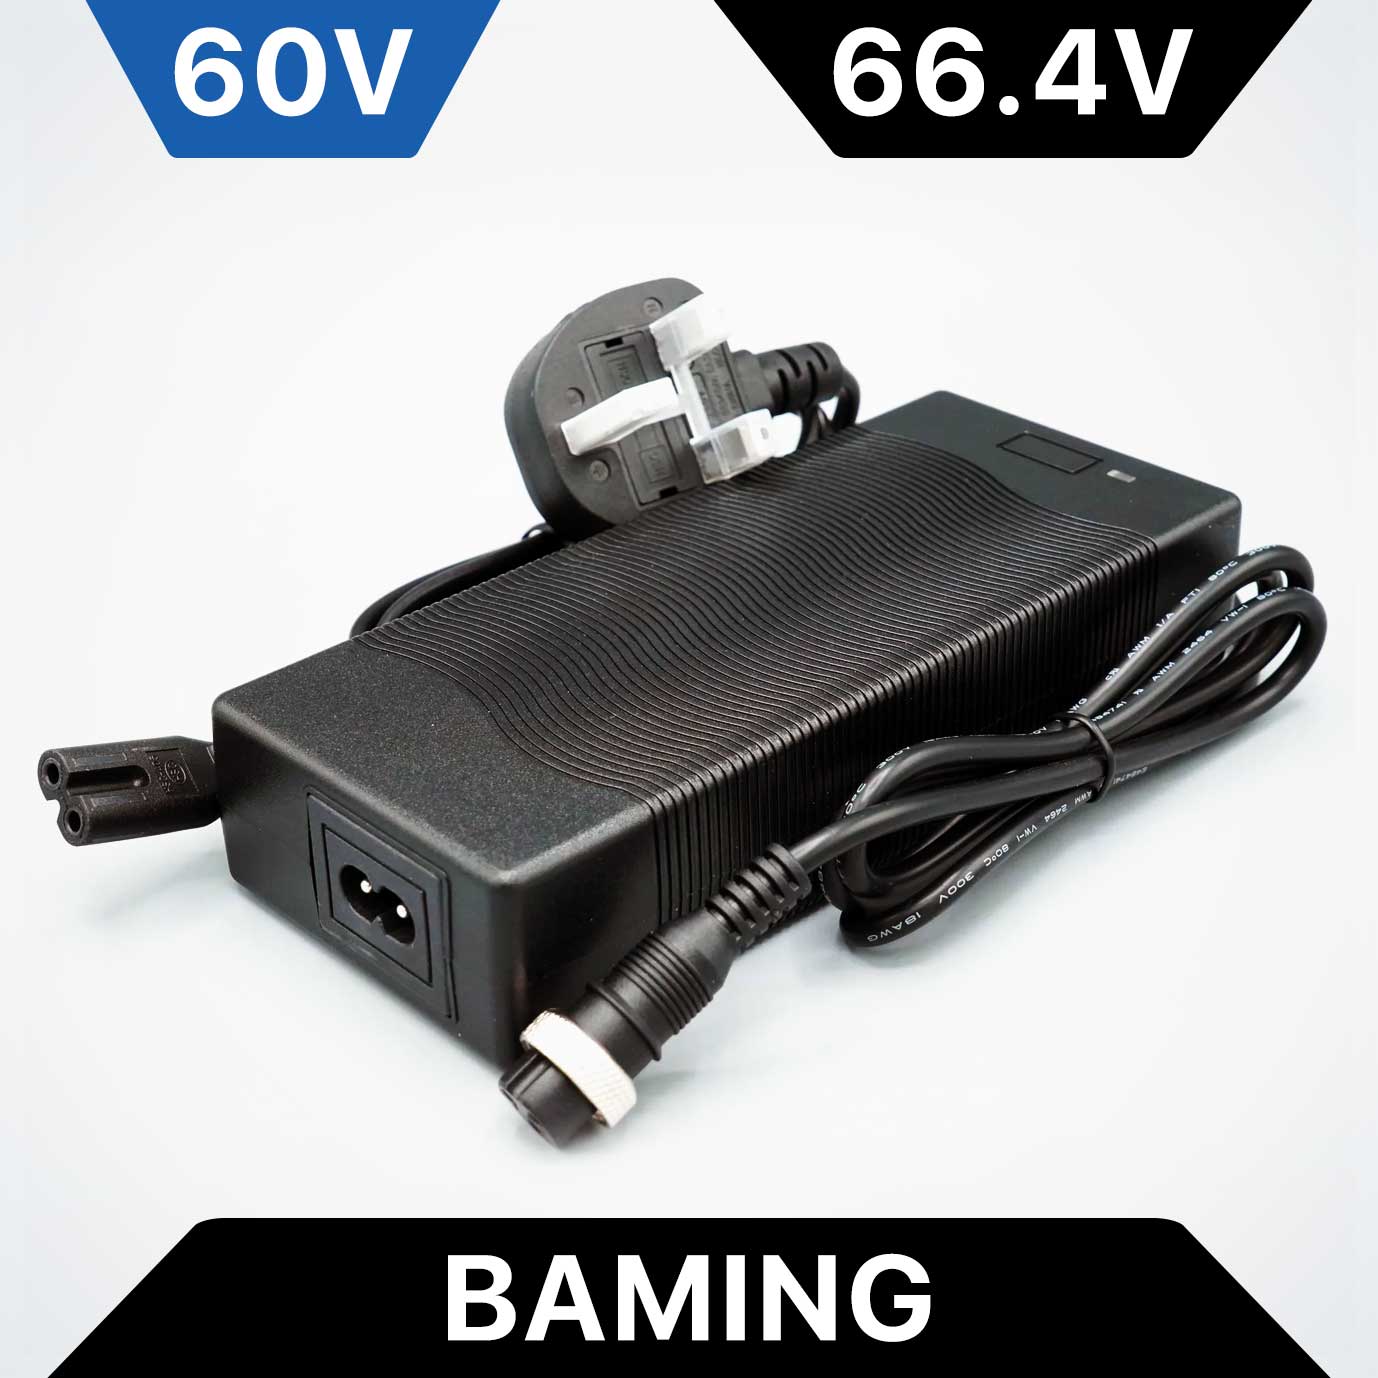 60V 1.75A Slow Charger for Dualtron, 66.4V Max, Baming Plug